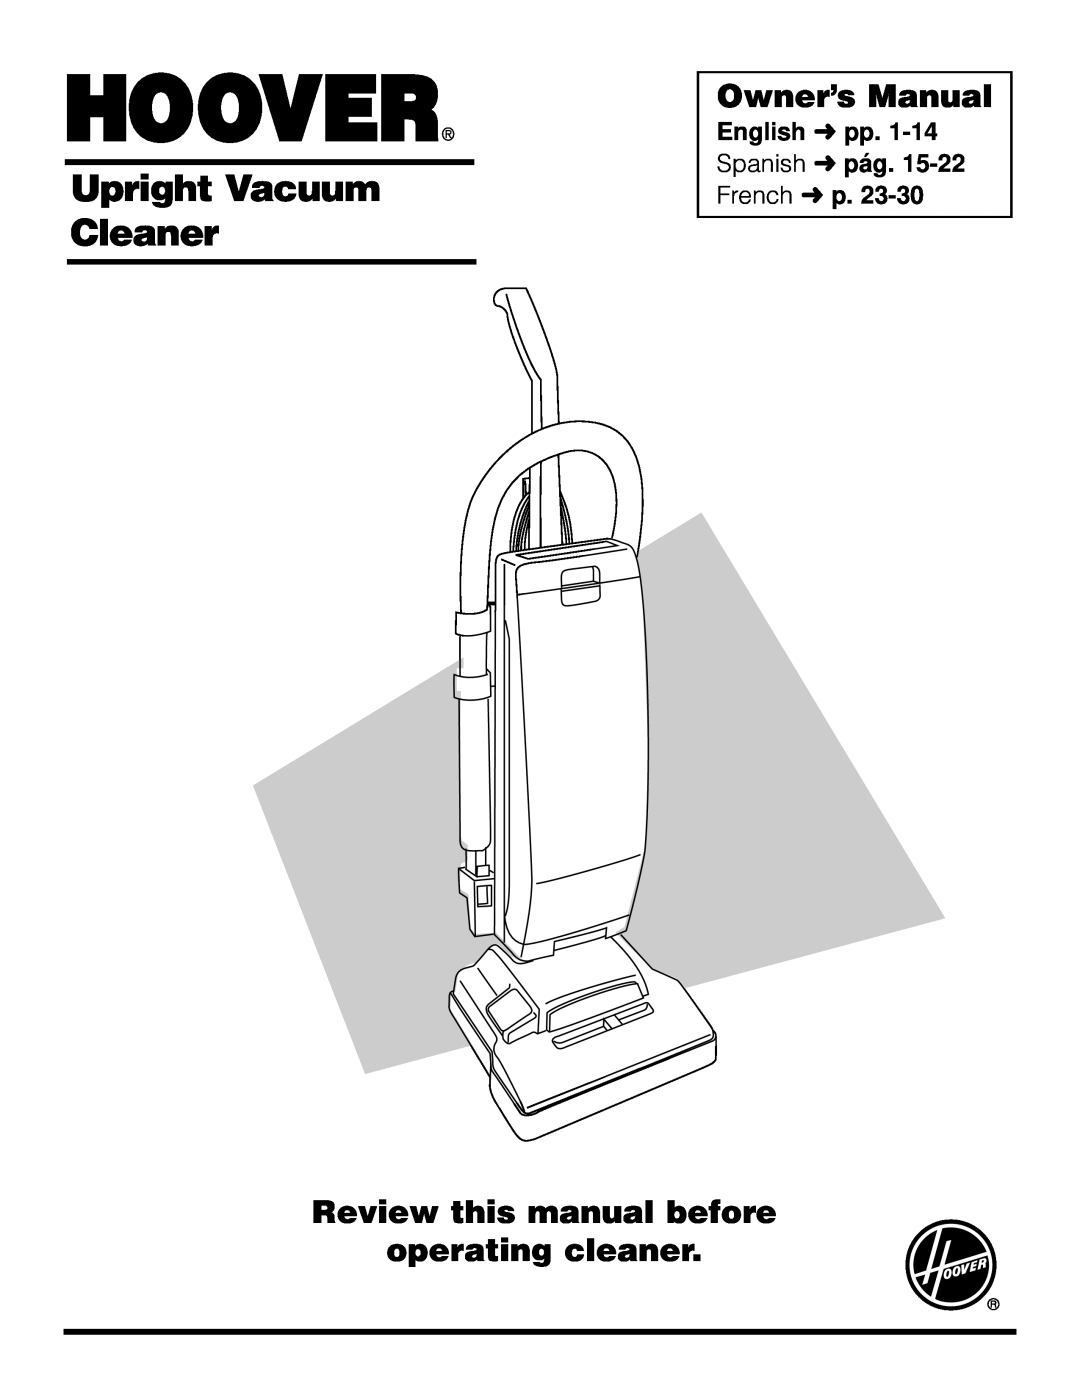 Hoover 4600 owner manual Owner’s Manual, Review this manual before operating cleaner, Upright Vacuum Cleaner 